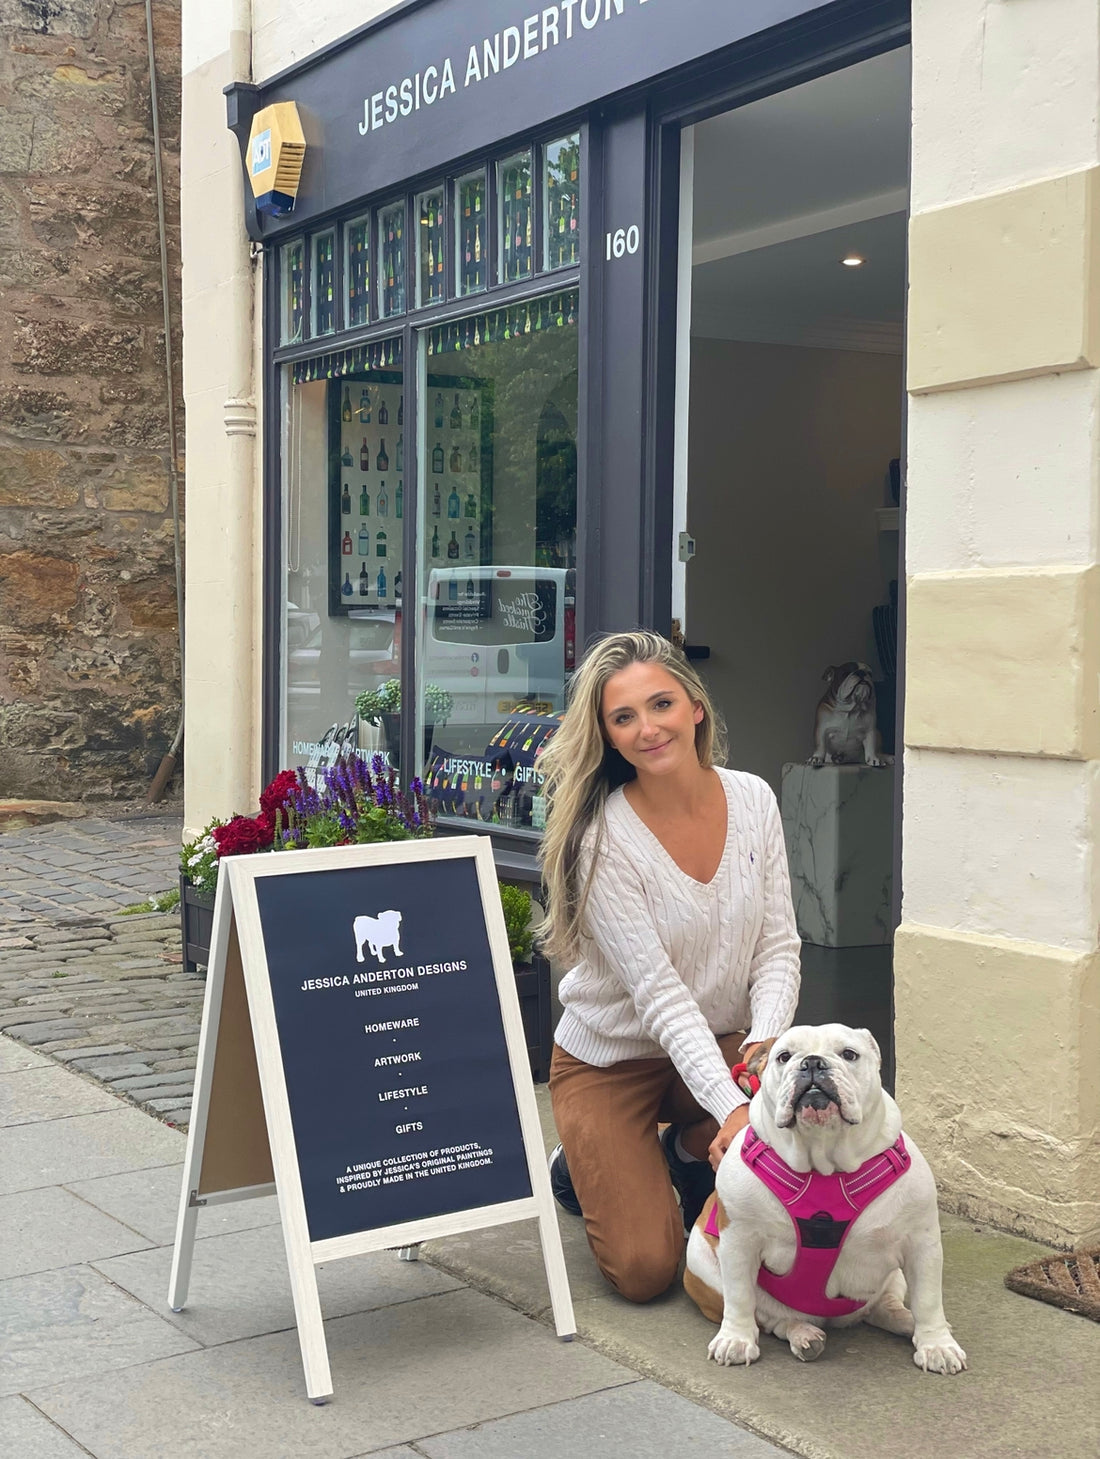 St Andrews: Home to the first Jessica Anderton Designs store